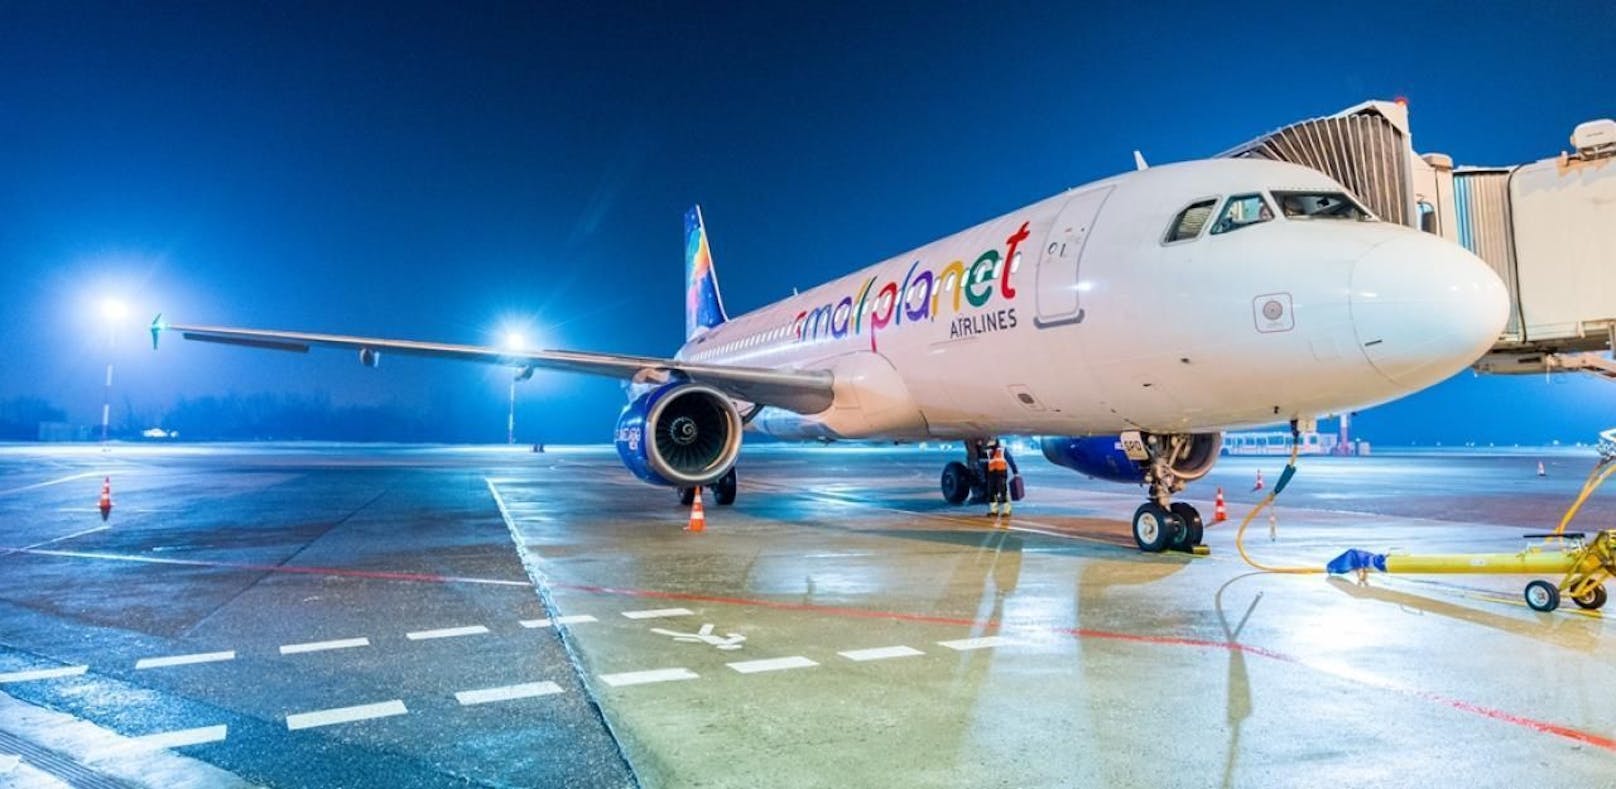 Small Planet Airlines Airbus A320 LY-SPD am Flughafen Vilnius.